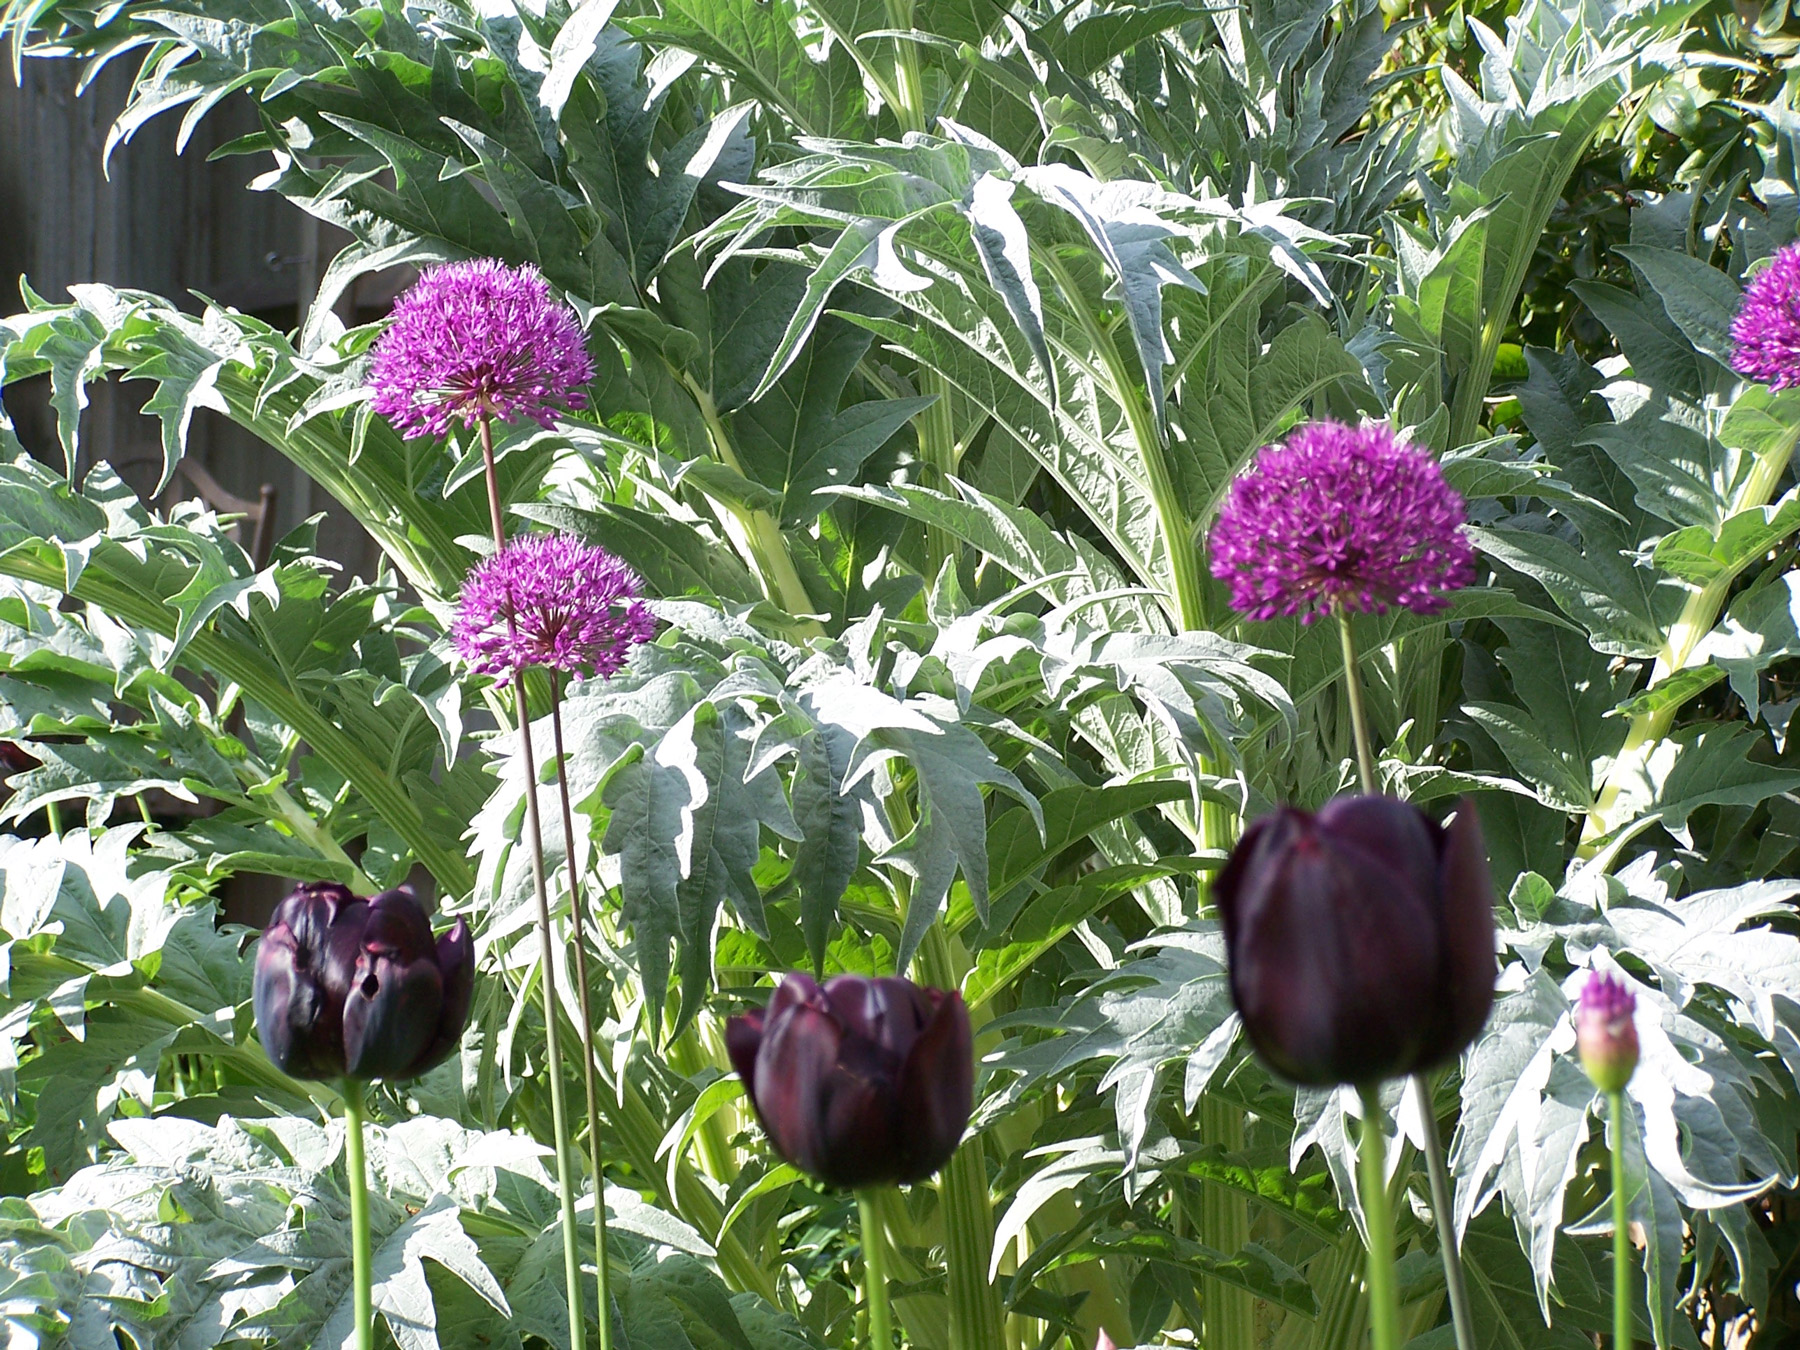 Tulips and alliums